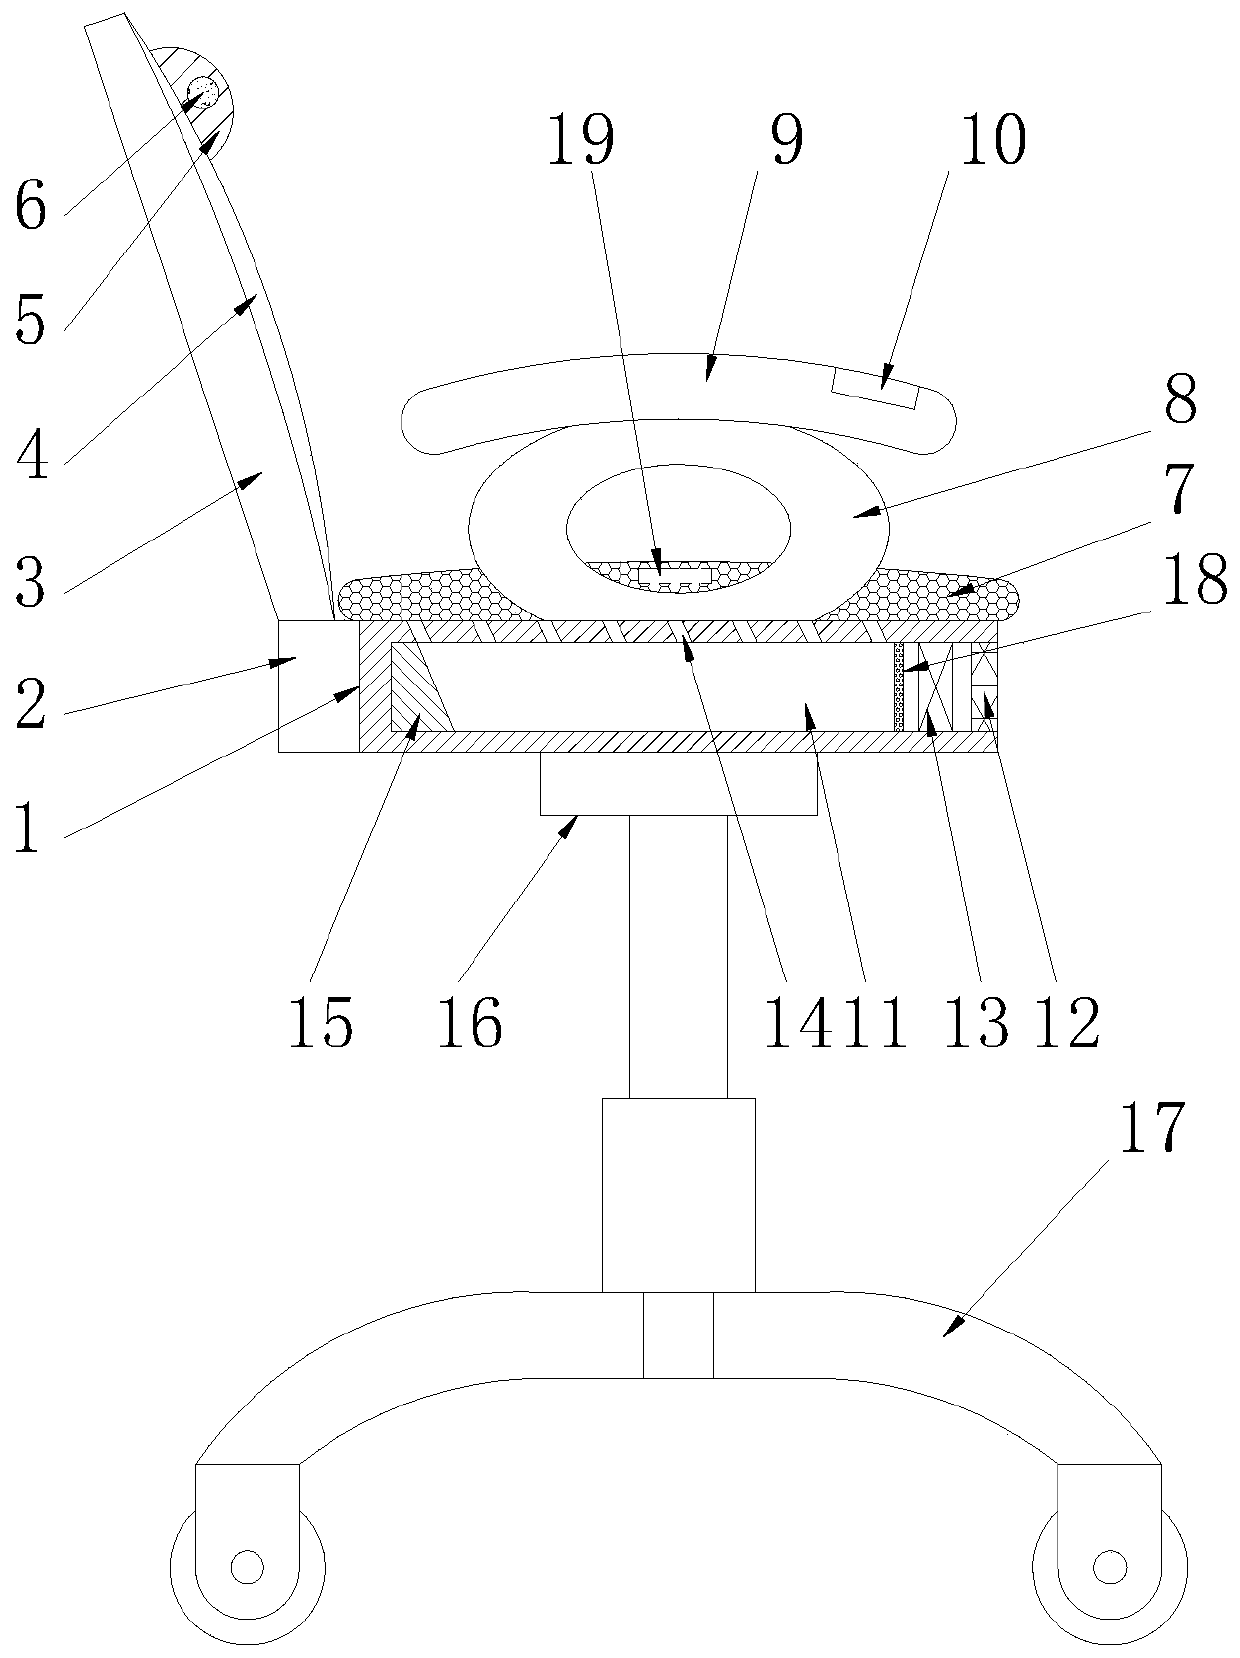 Intelligent office chair system and prompting method thereof